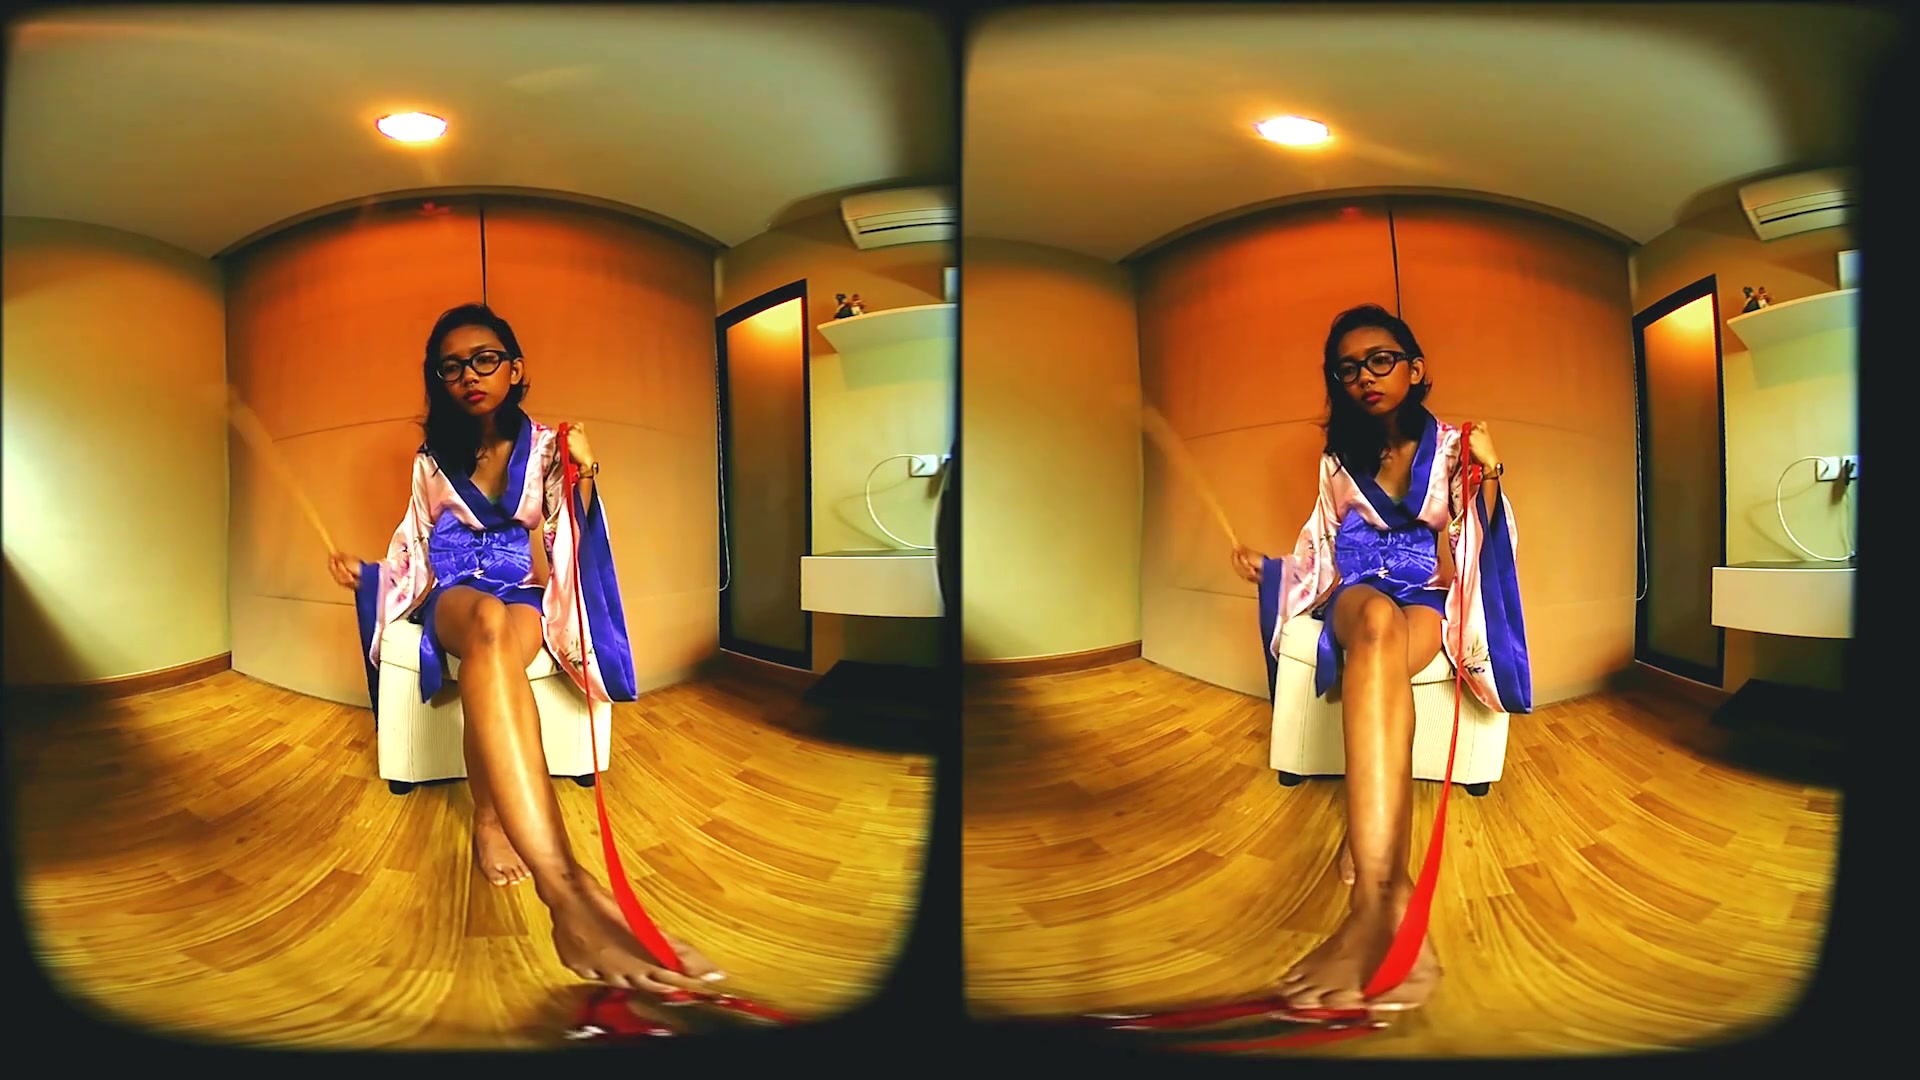 Hart Dominatrix In Japanese Style - VRPussyVision